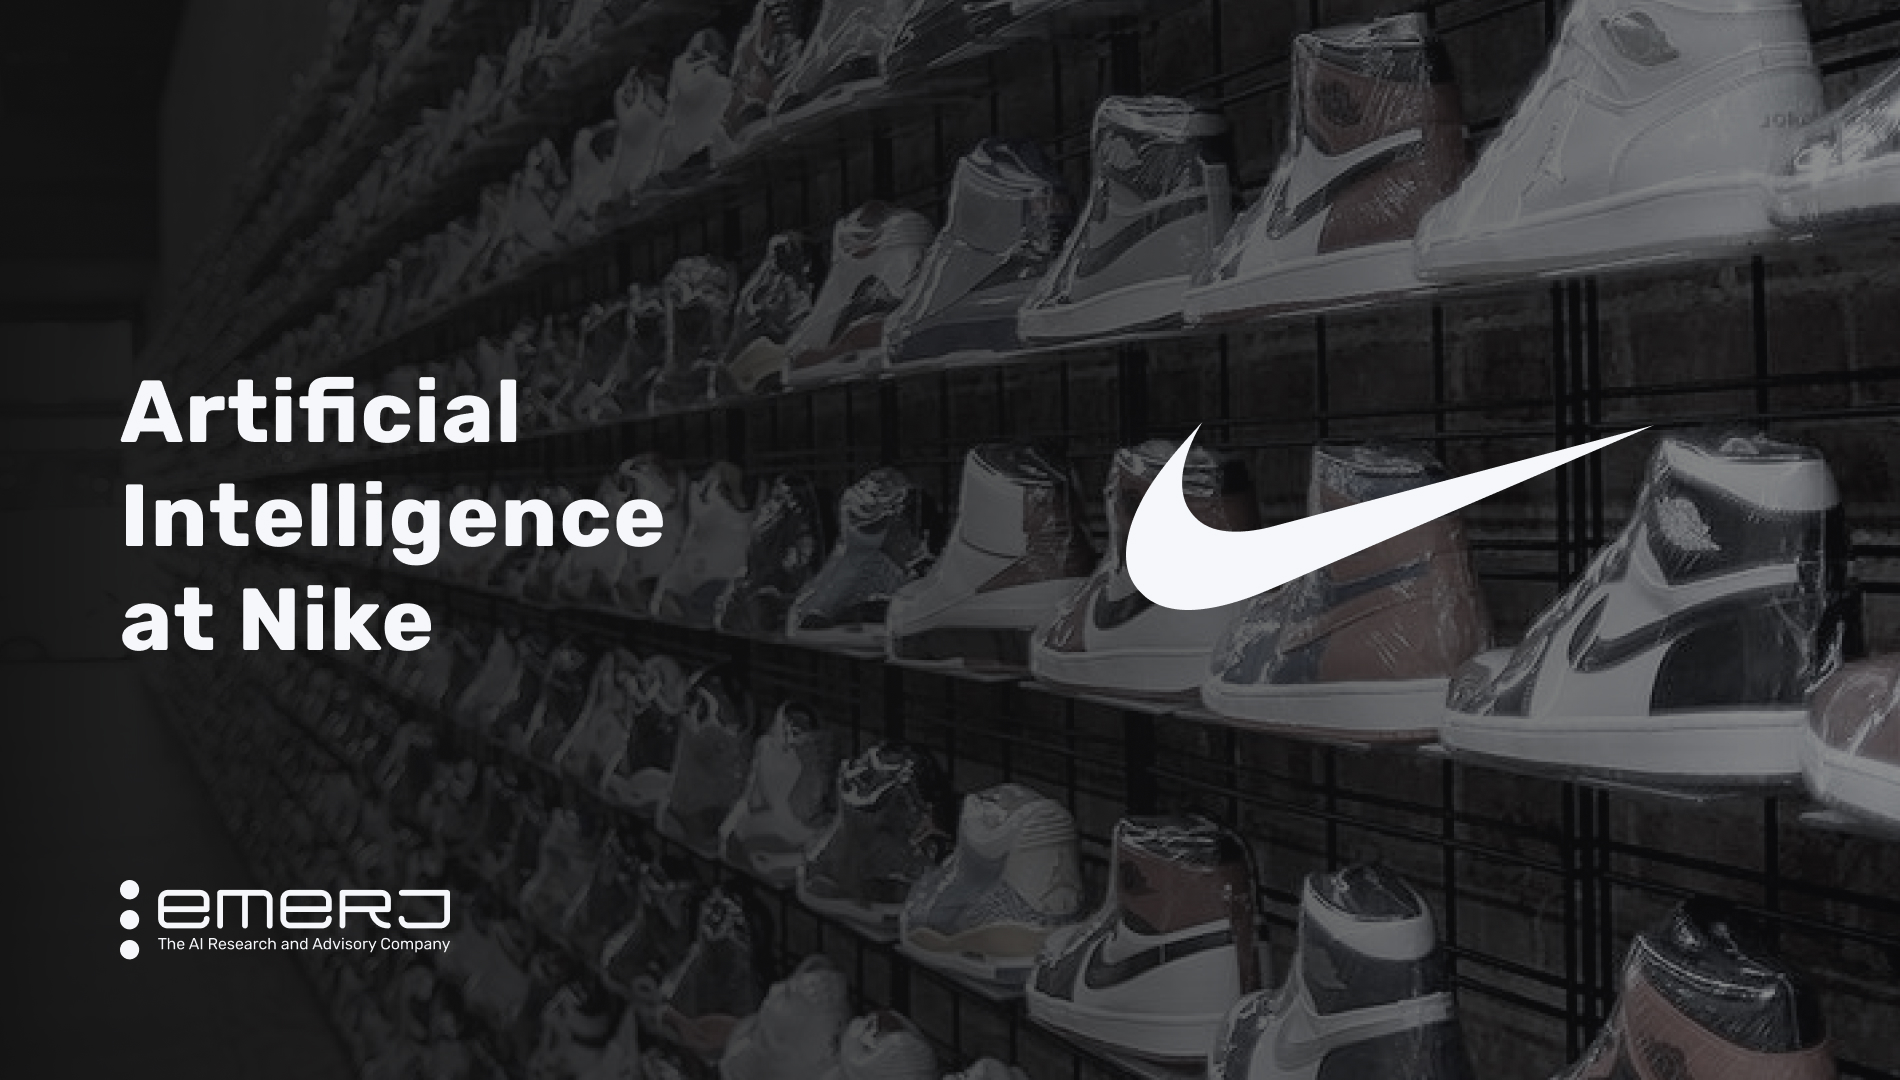 deed het portemonnee lastig Artificial Intelligence at Nike – Two Current Use-Cases | Emerj Artificial  Intelligence Research